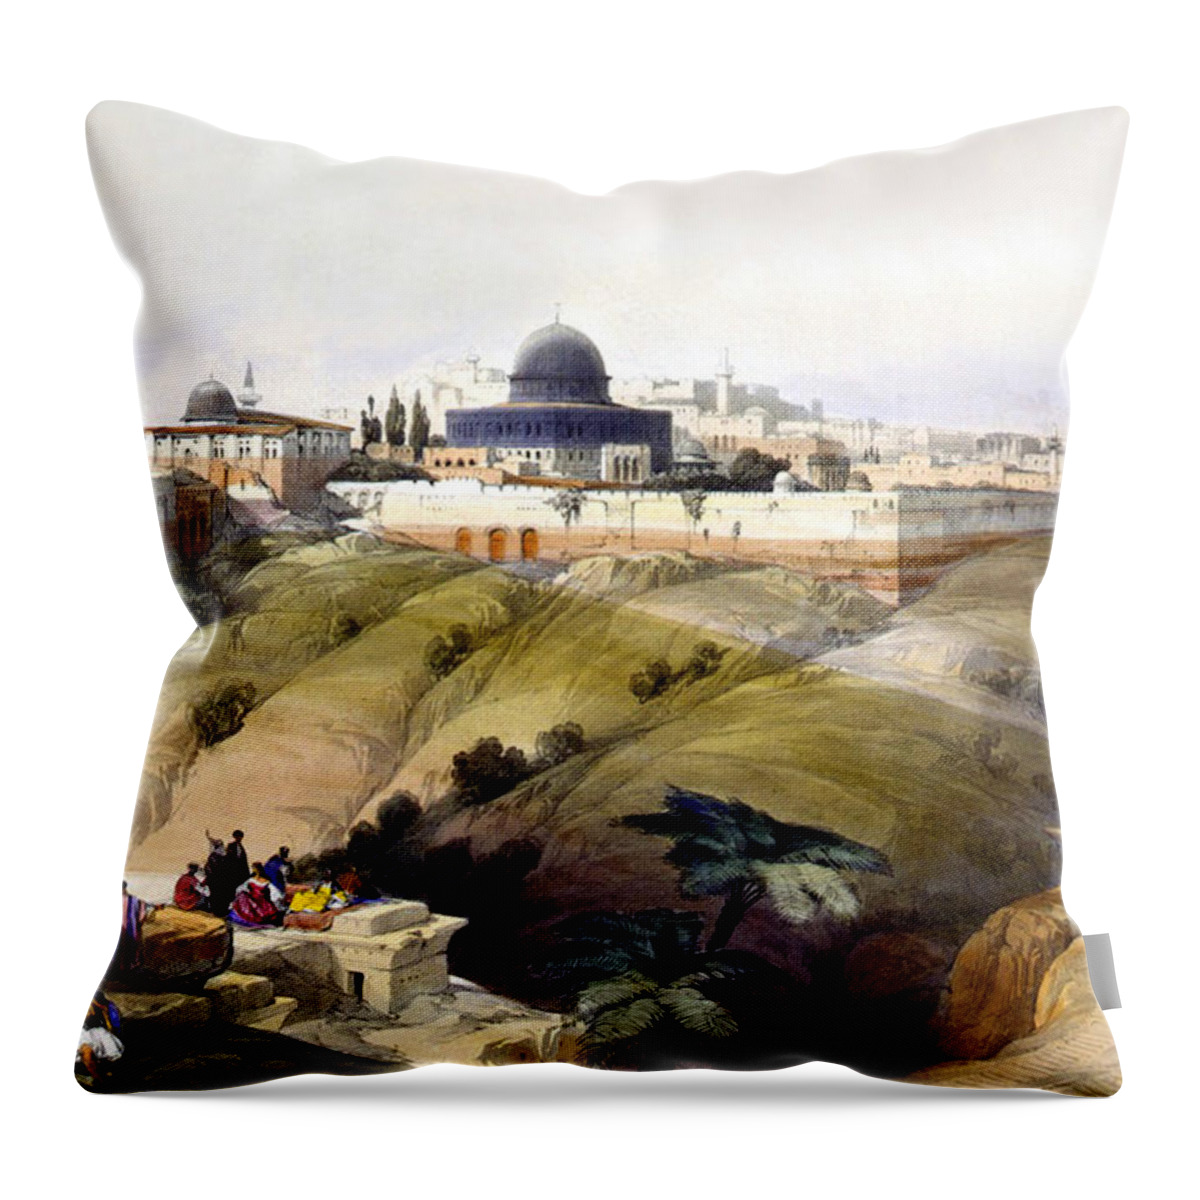 Dome Of The Rock Throw Pillow featuring the photograph Dome of the Rock by Munir Alawi